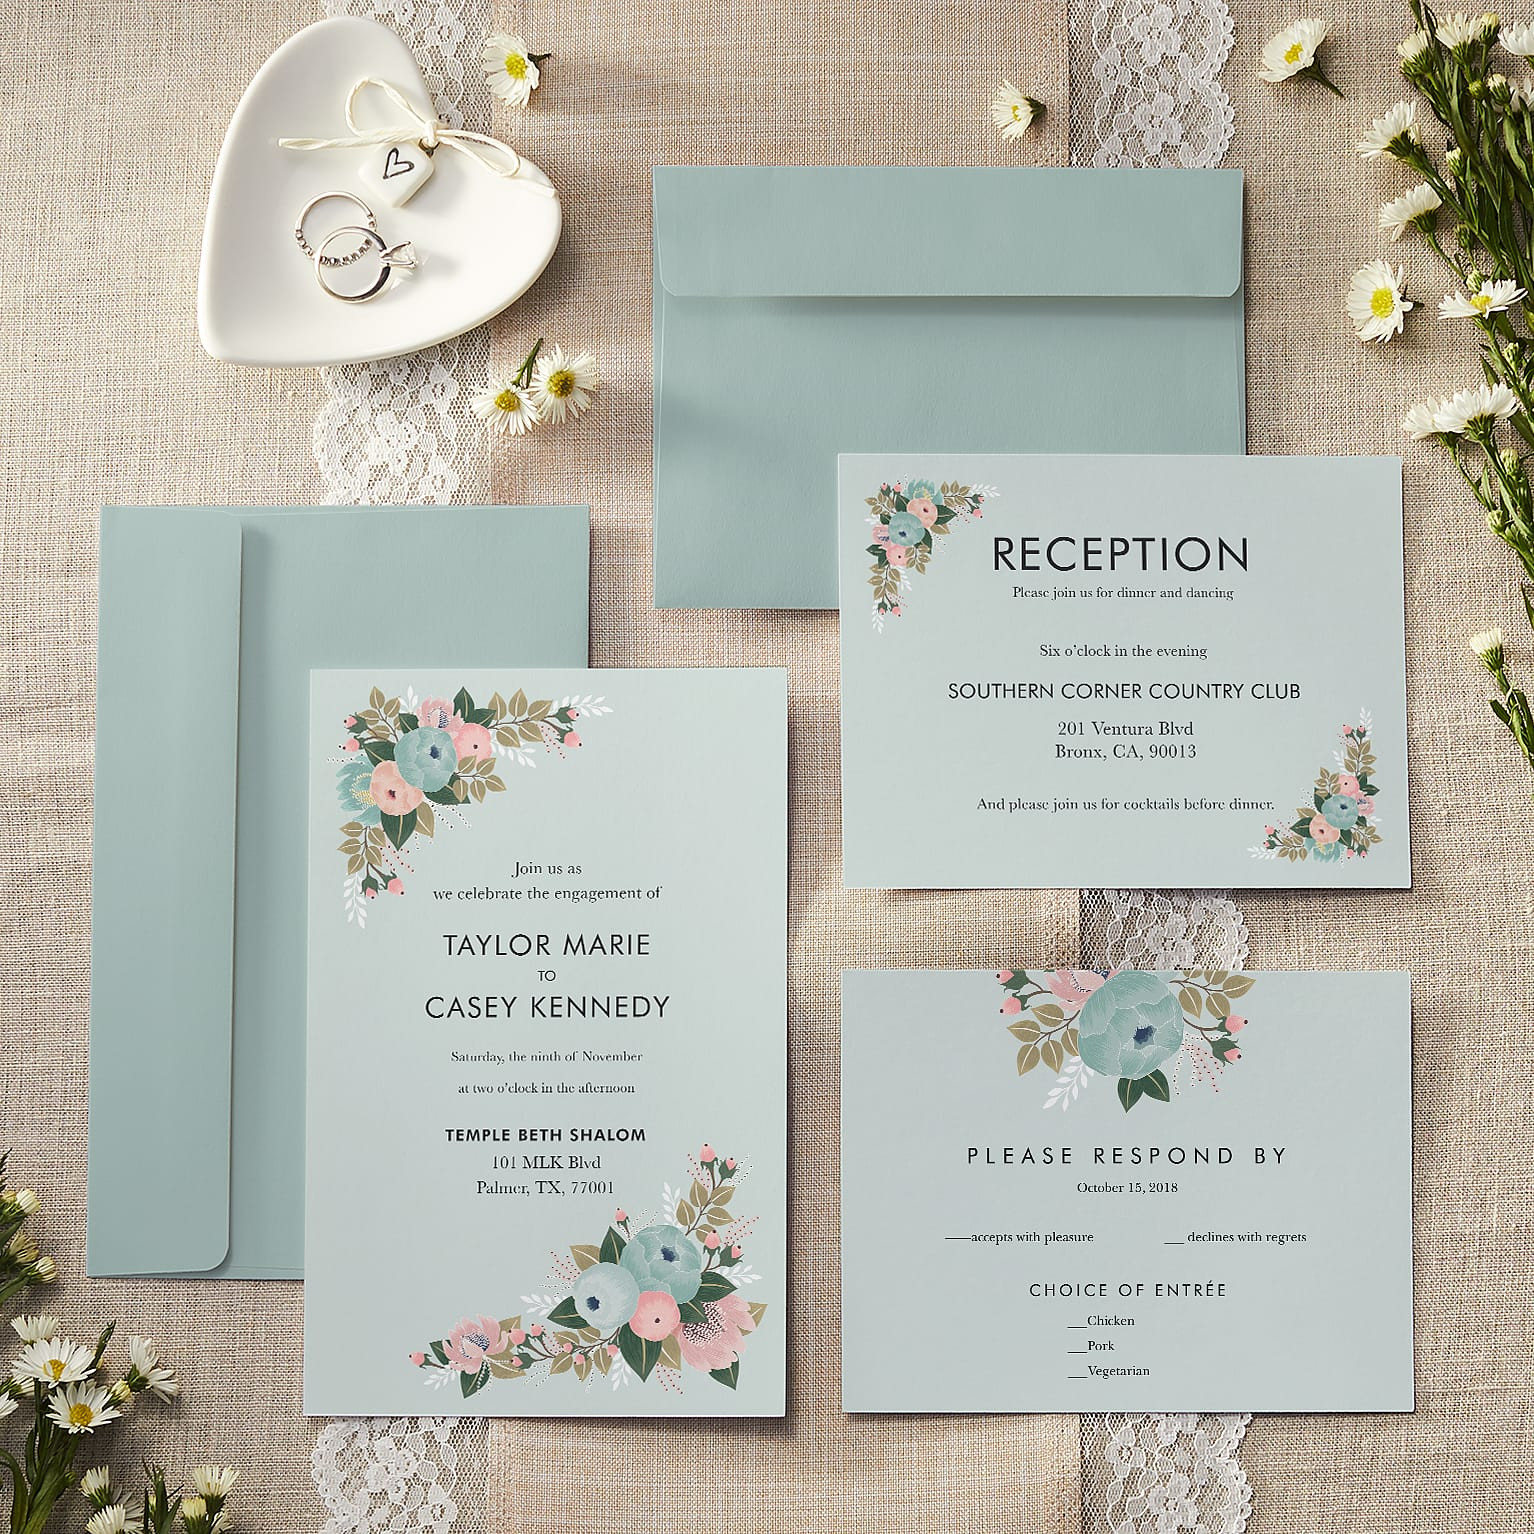 21 Ideas for Wedding Invitations Vistaprint - Home, Family, Style and